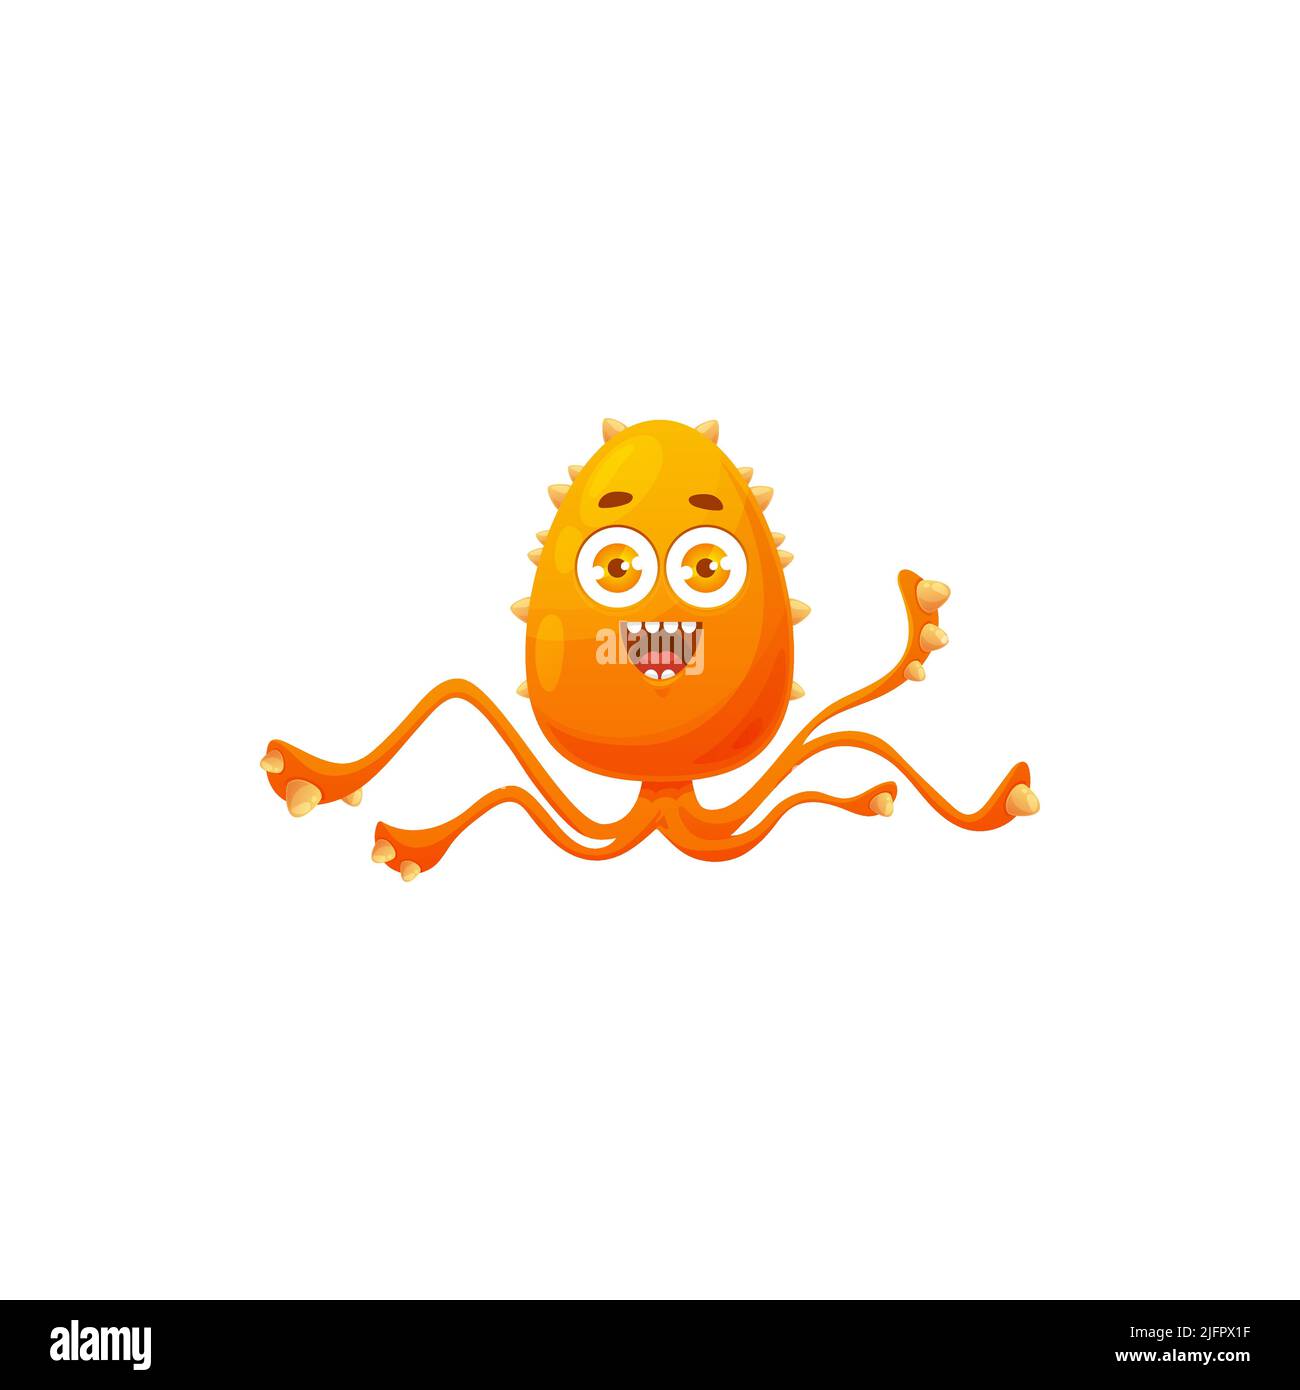 Cartoon virus cell vector icon, cute spiked orange bacteria with long tentacles, happy germ character with funny face. Smiling pathogen microbe emoticon, isolated micro organism symbol Stock Vector